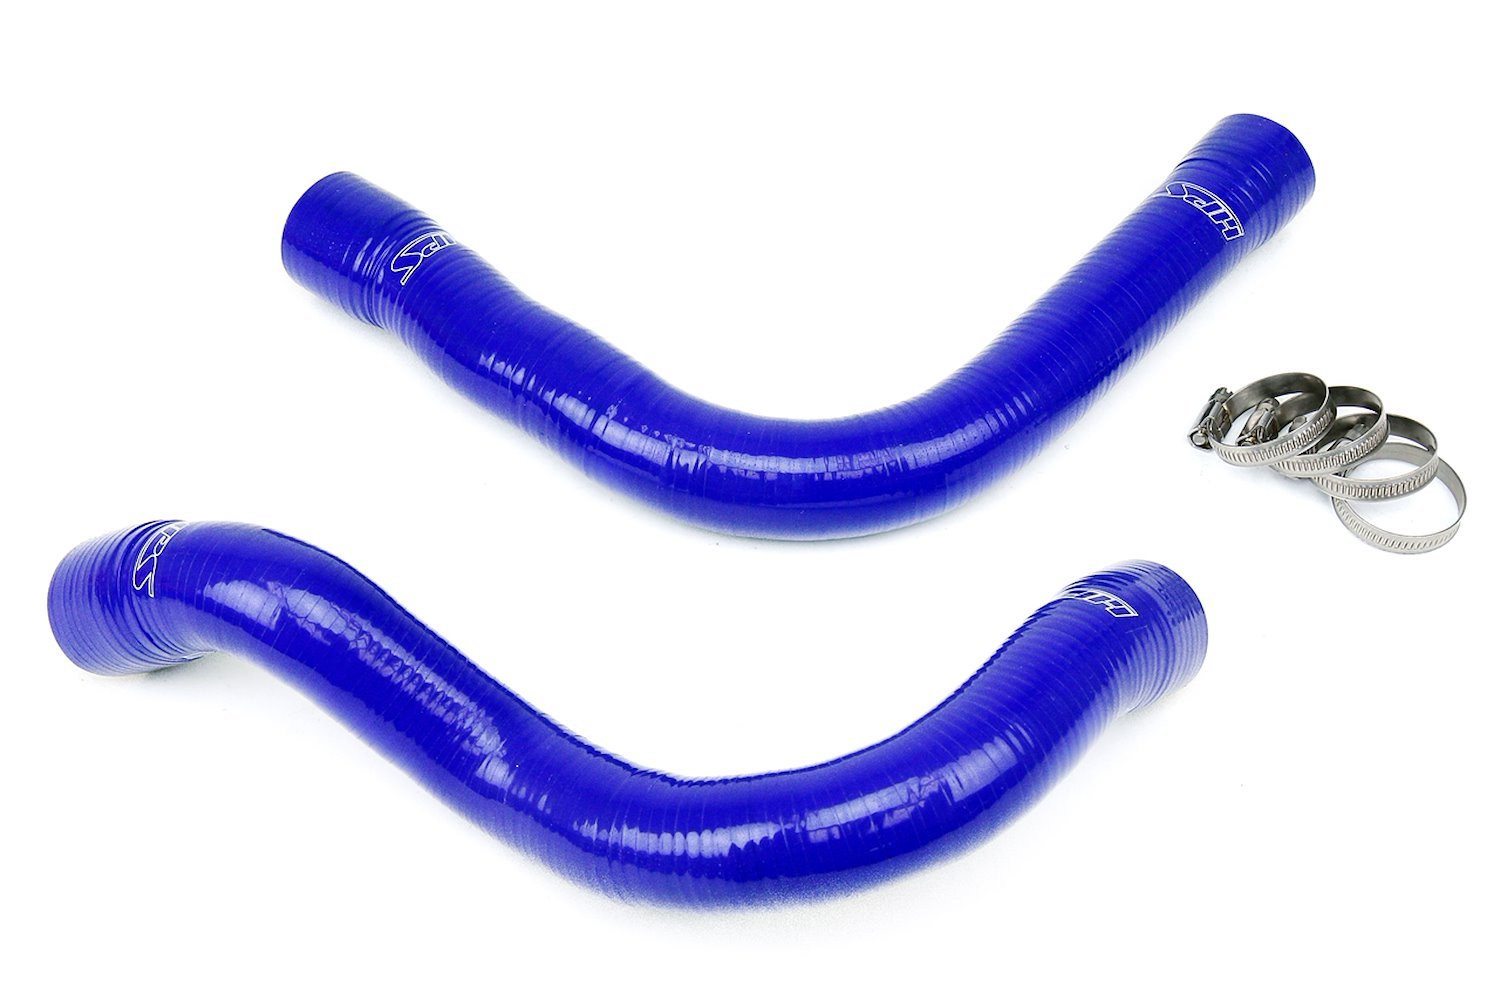 57-1007-BLUE Radiator Hose Kit, High-Temp 3-Ply Reinforced Silicone, Replace OEM Rubber Radiator Coolant Hoses